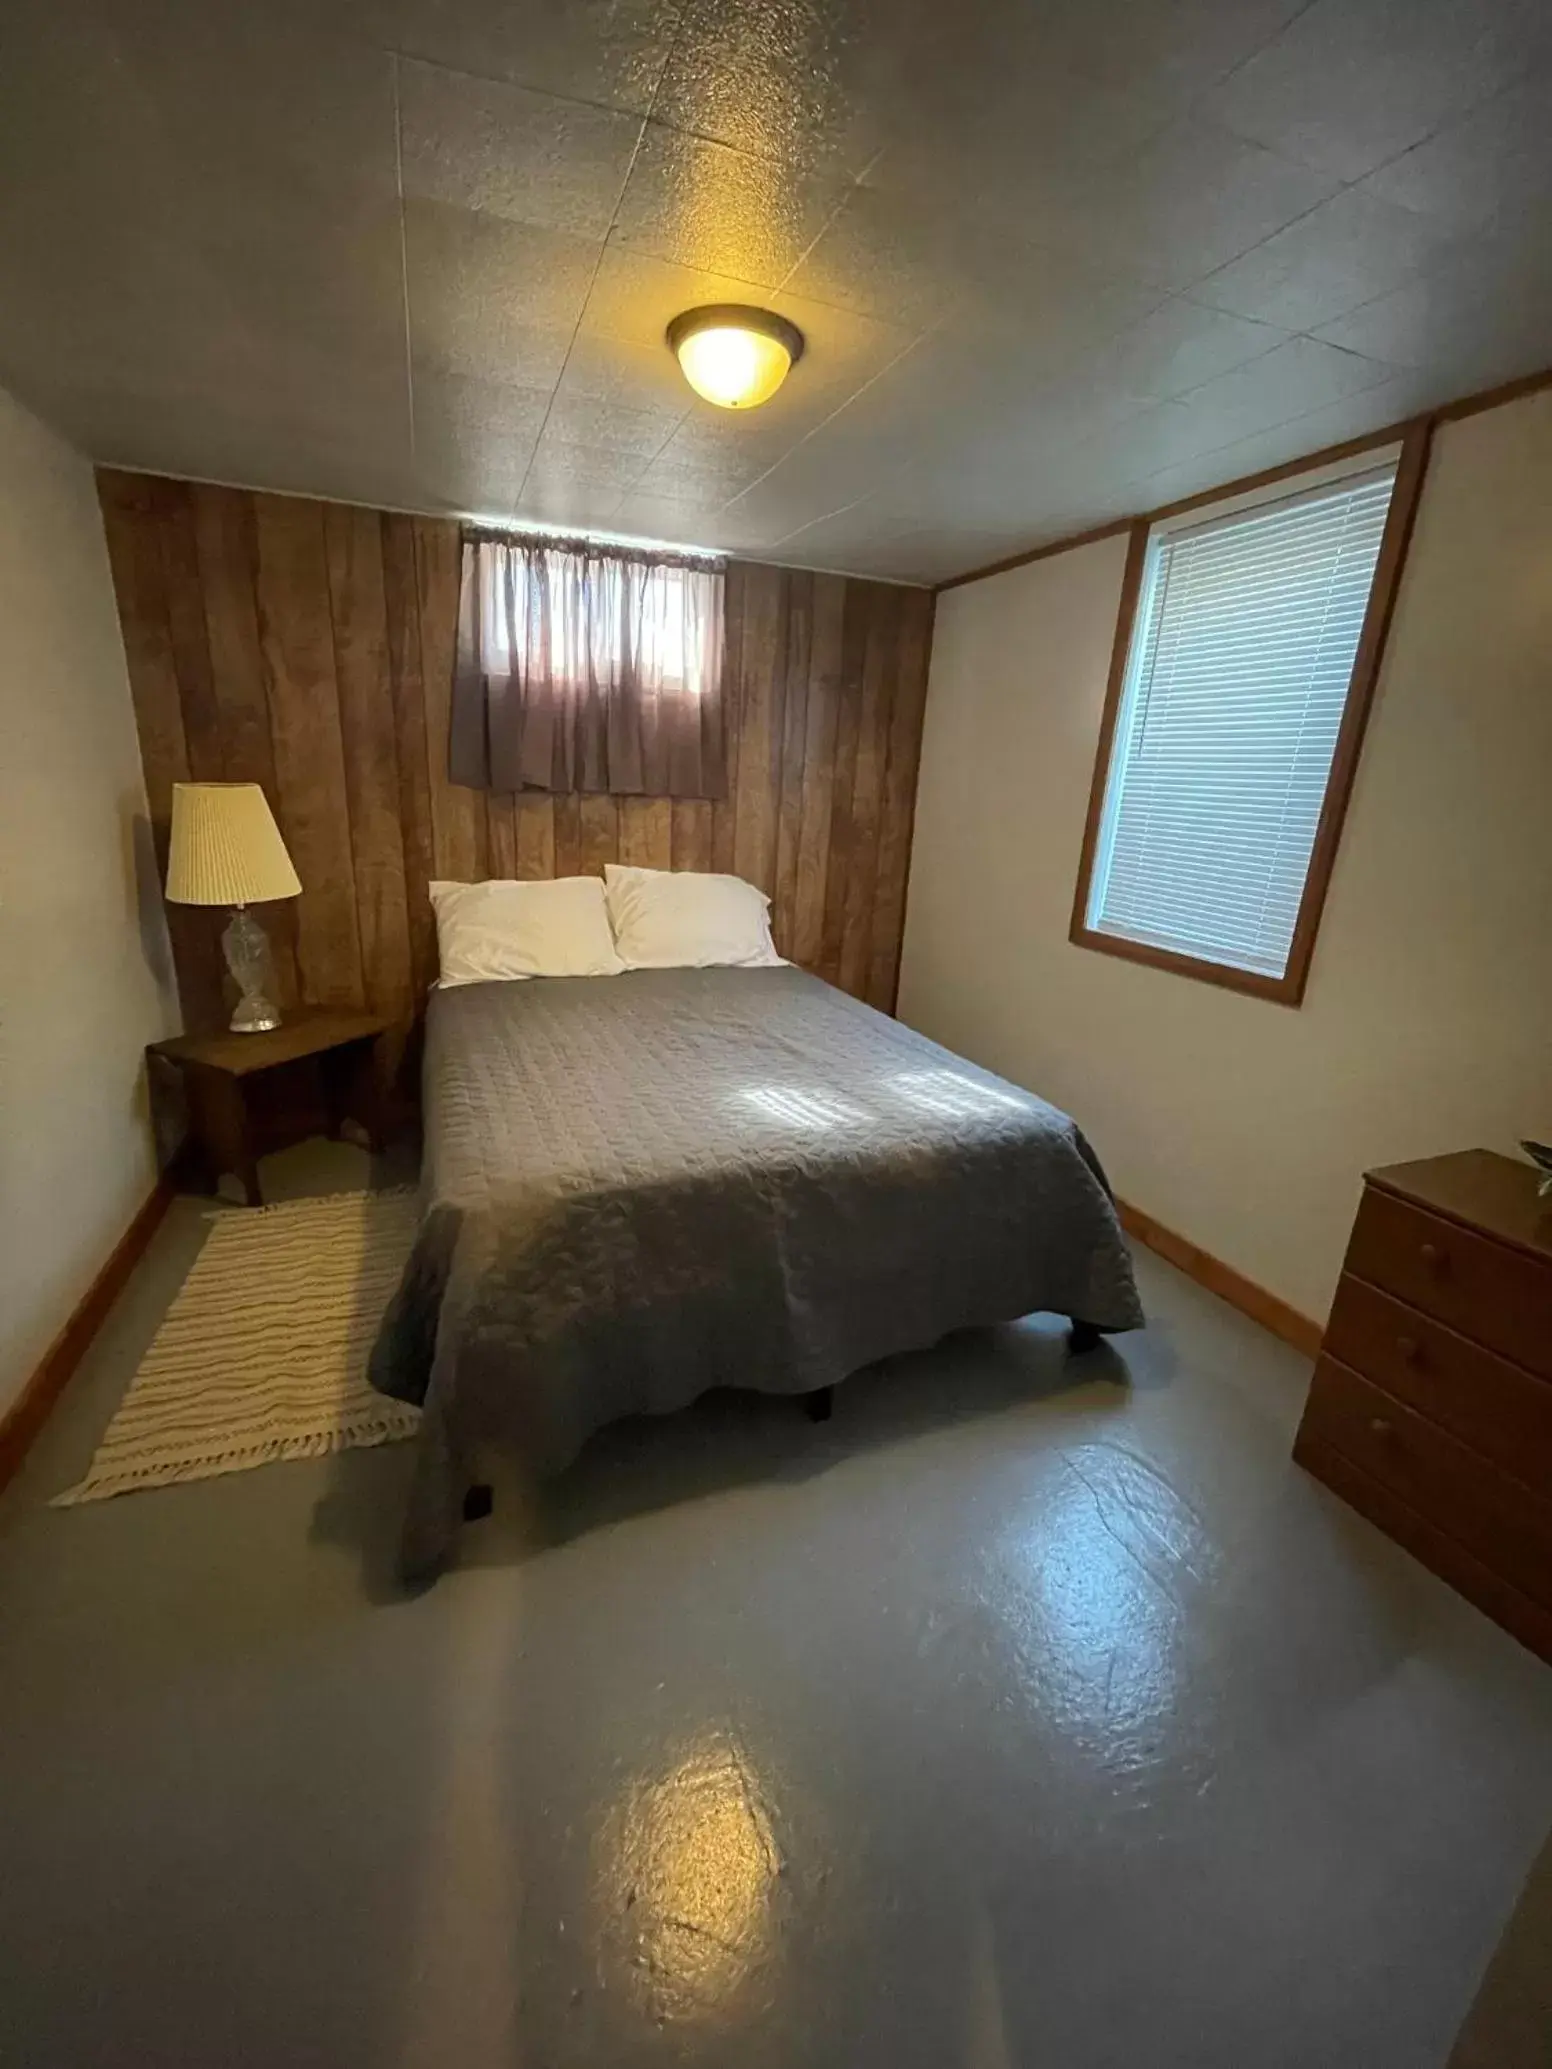 Three-Bedroom House in East Side Motel & Cabins